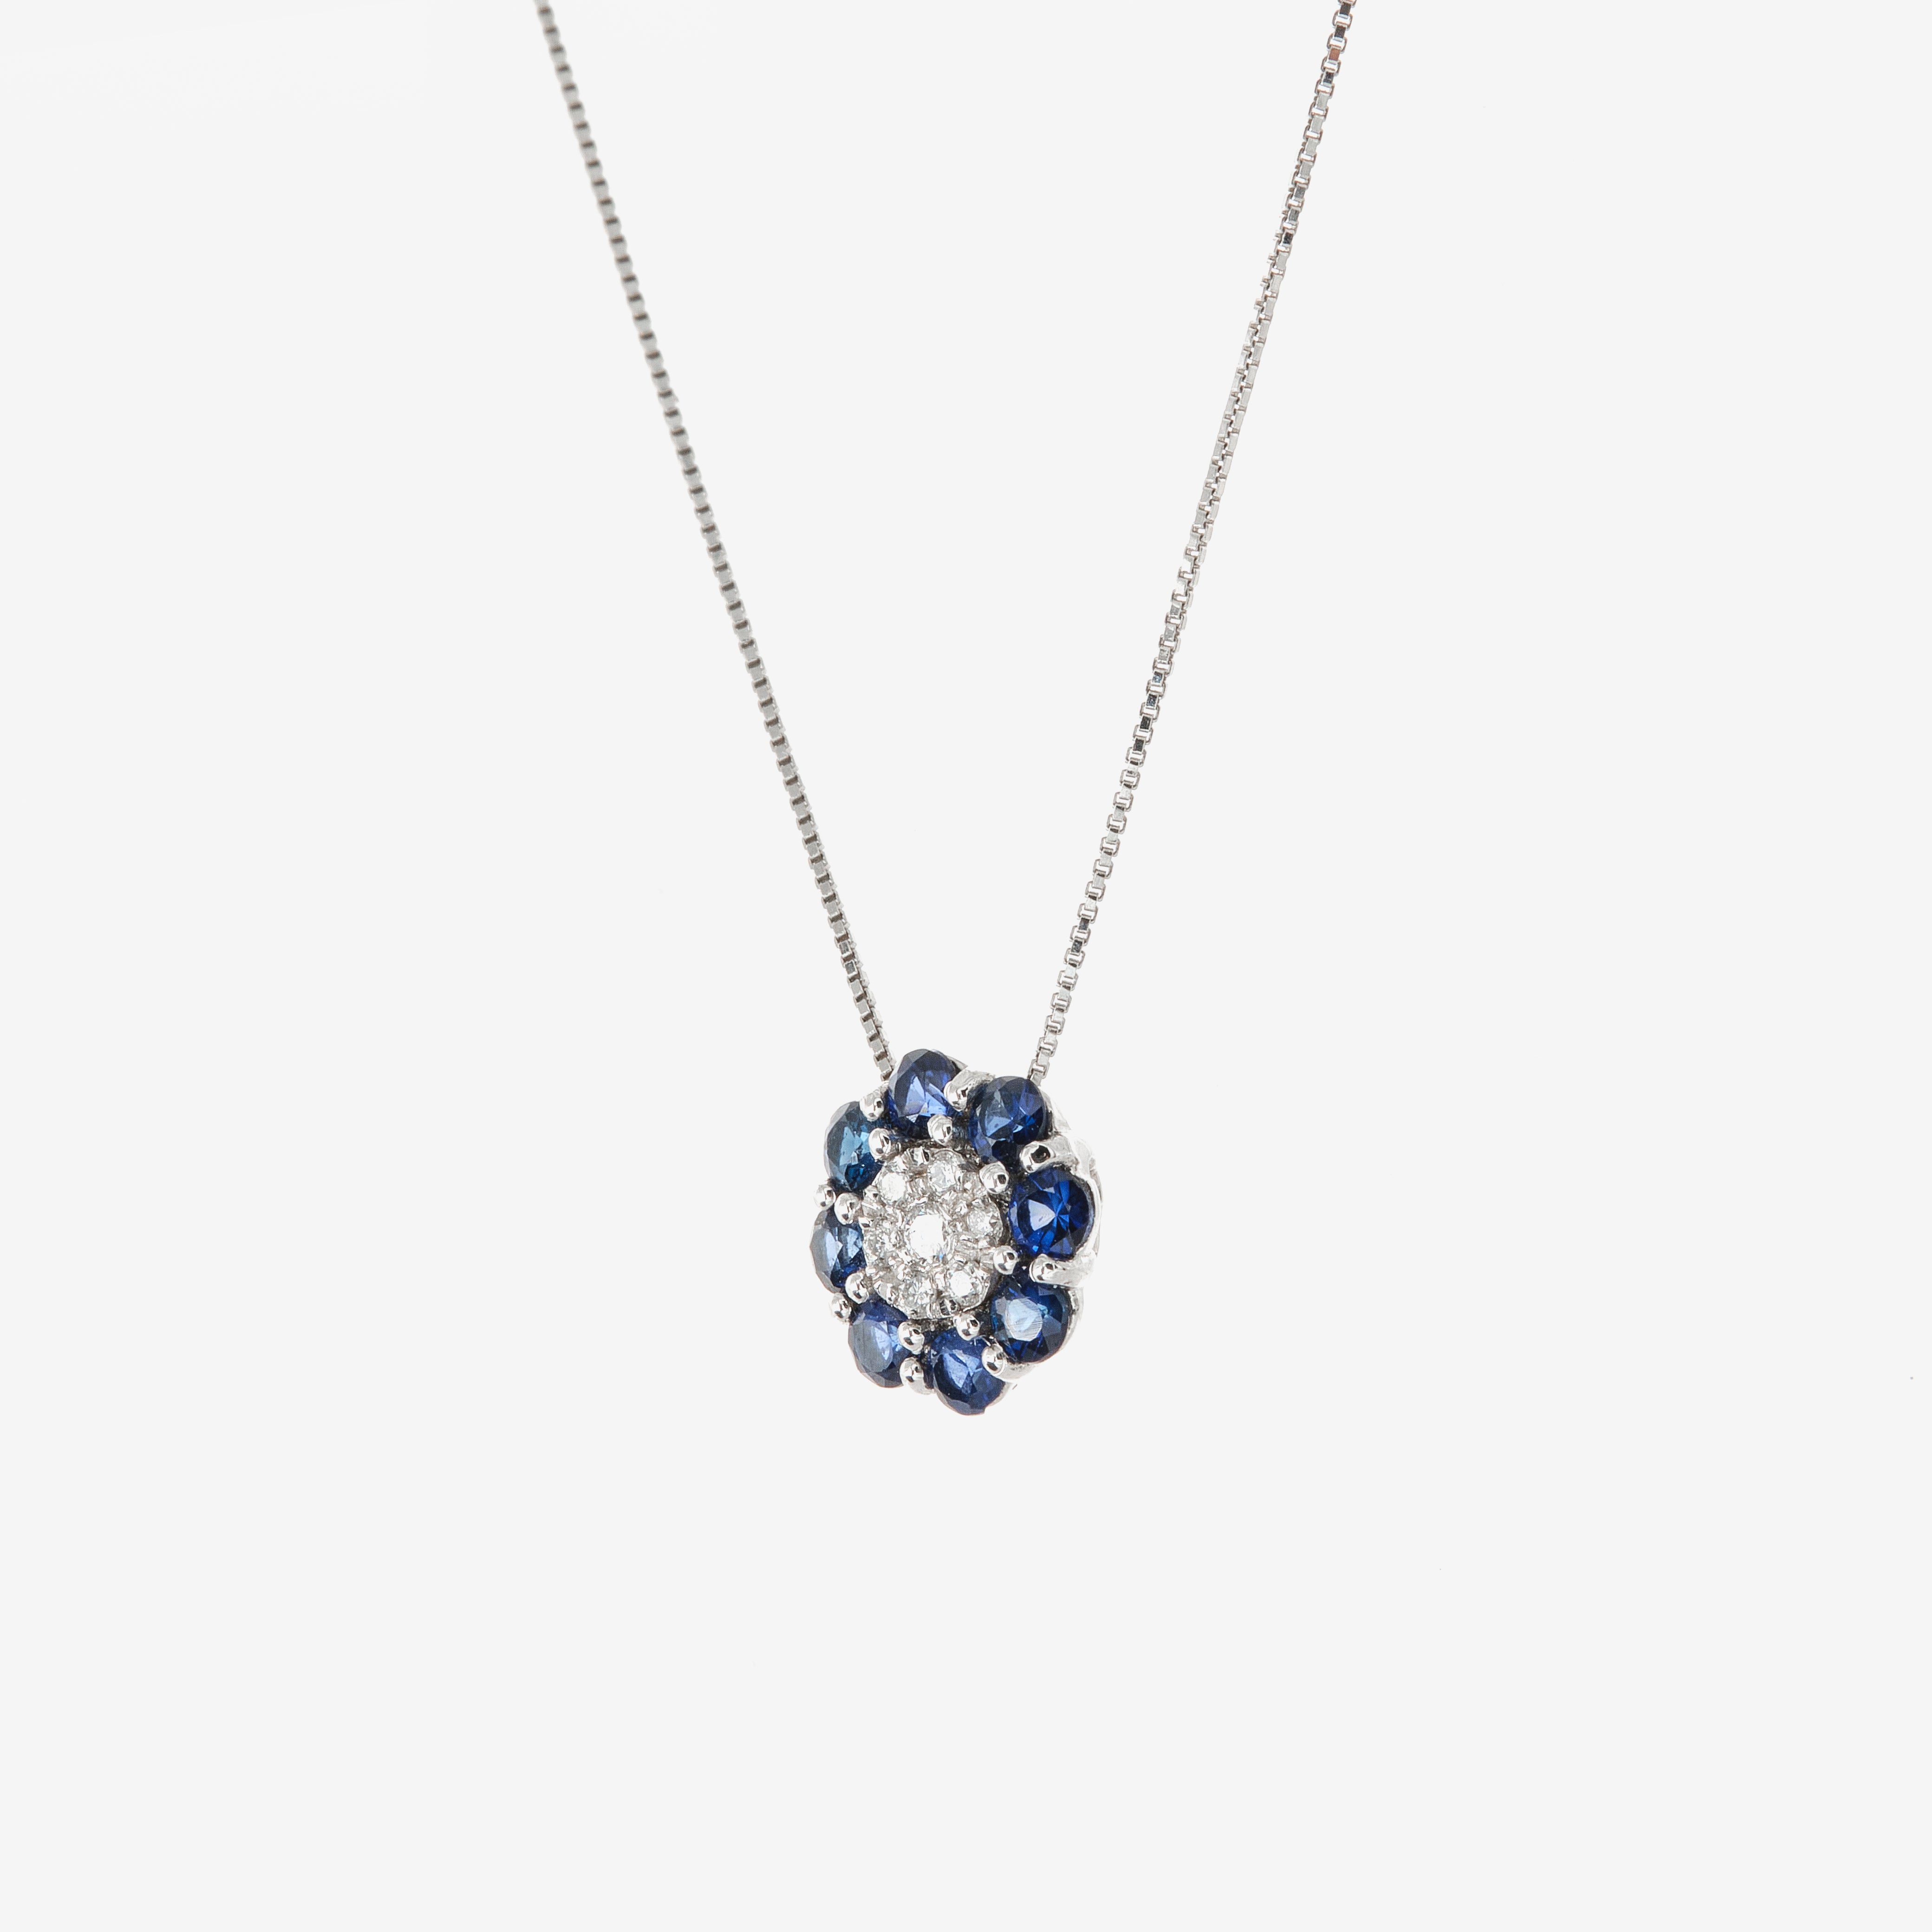 Flower necklace with sapphires and diamonds